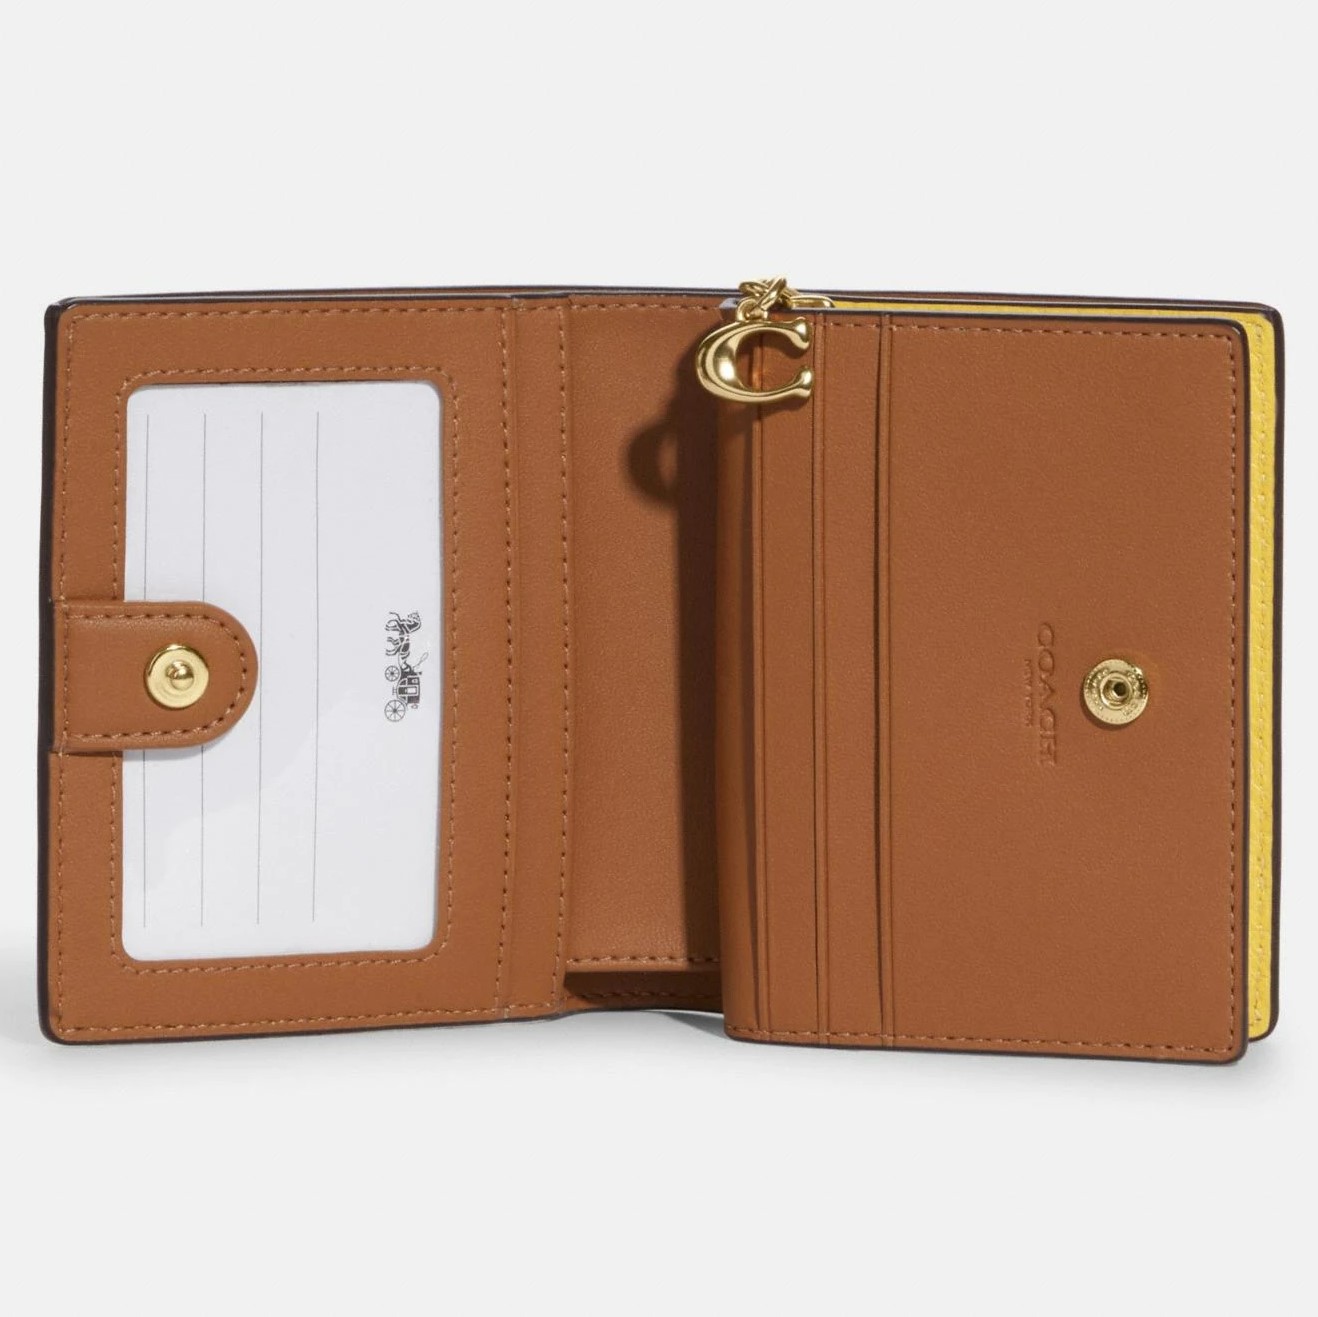 VÍ NGẮN COACH SMALL WALLET PEBBLE LEATHER SNAP WALLET 9